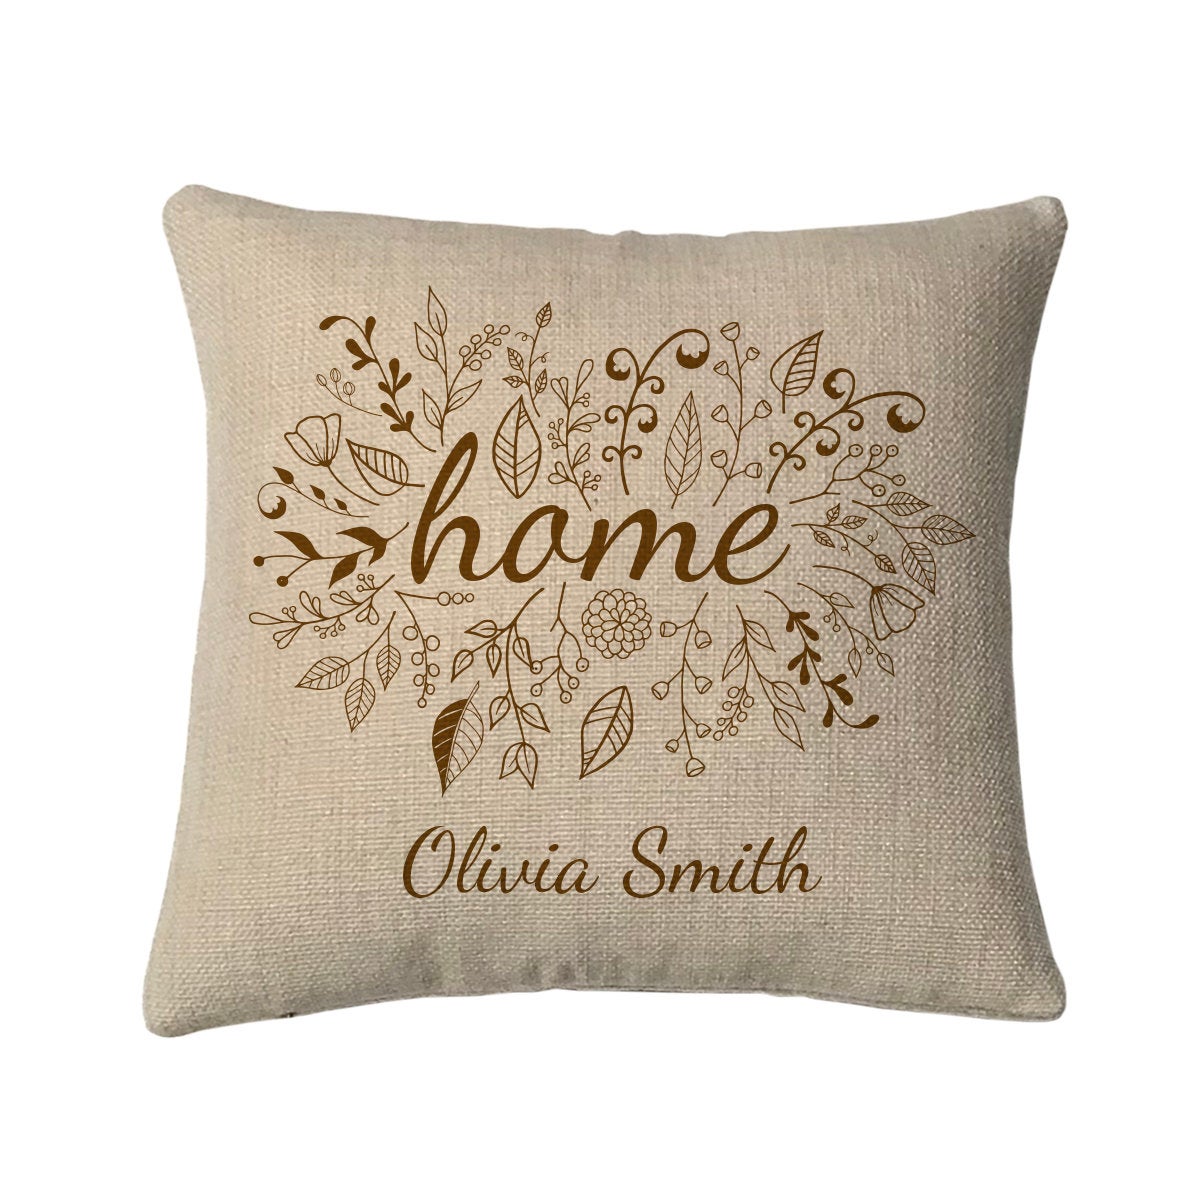 Personalized Home Mini Throw Pillow Measures 9.5 Inches X 9.5 Inches (Insert is included) Complete Very Small Throw Pillow